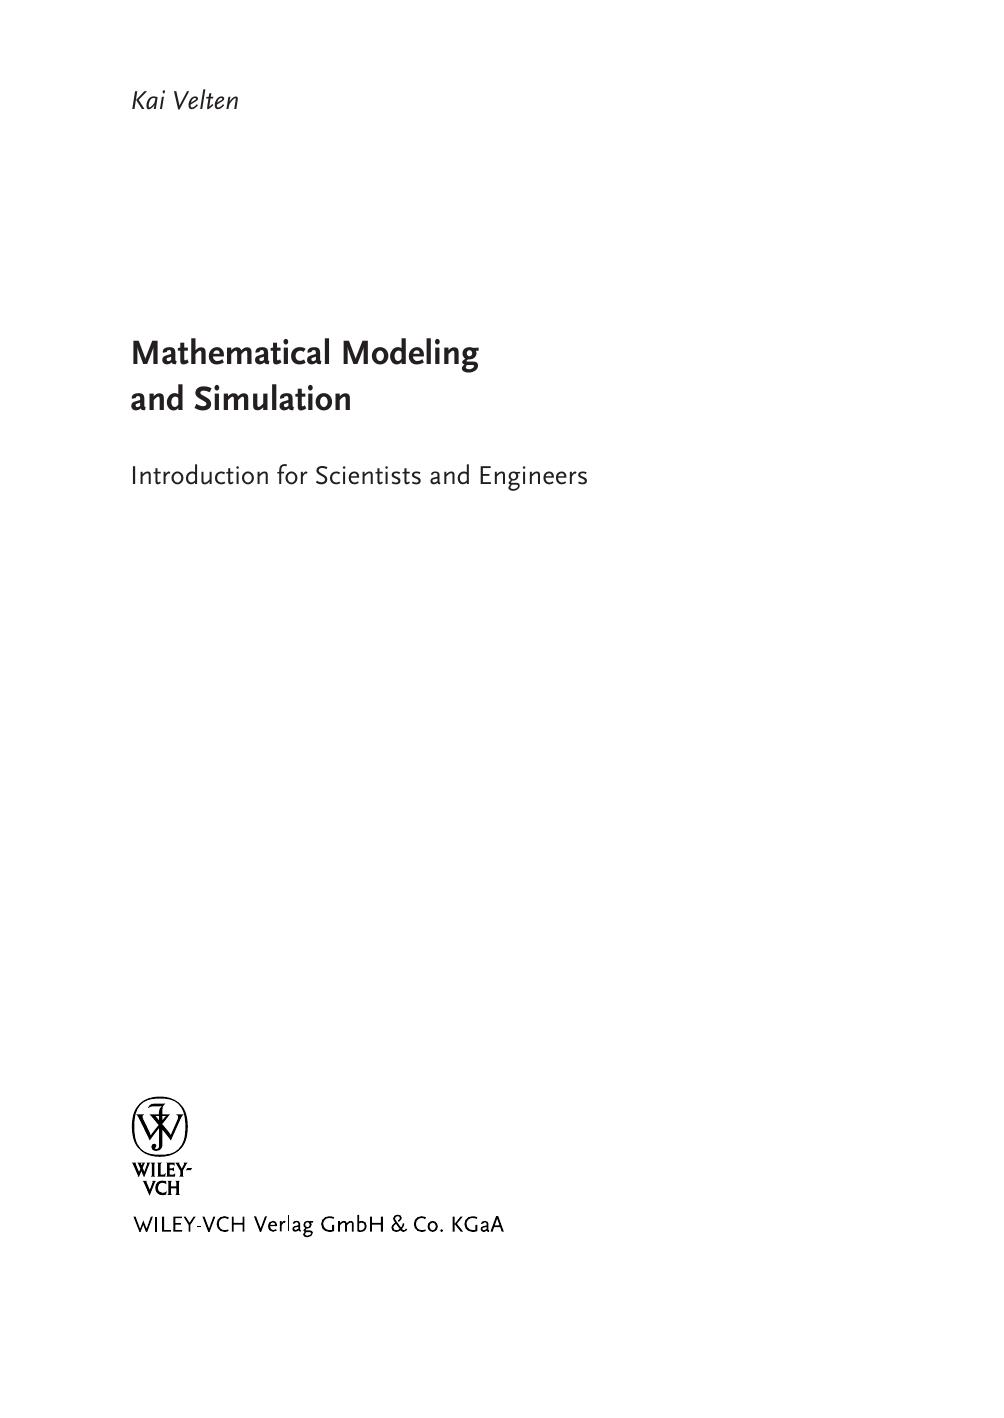 Mathematical Modeling and Simulation- Introduction for Scientists and Engineers                    2009